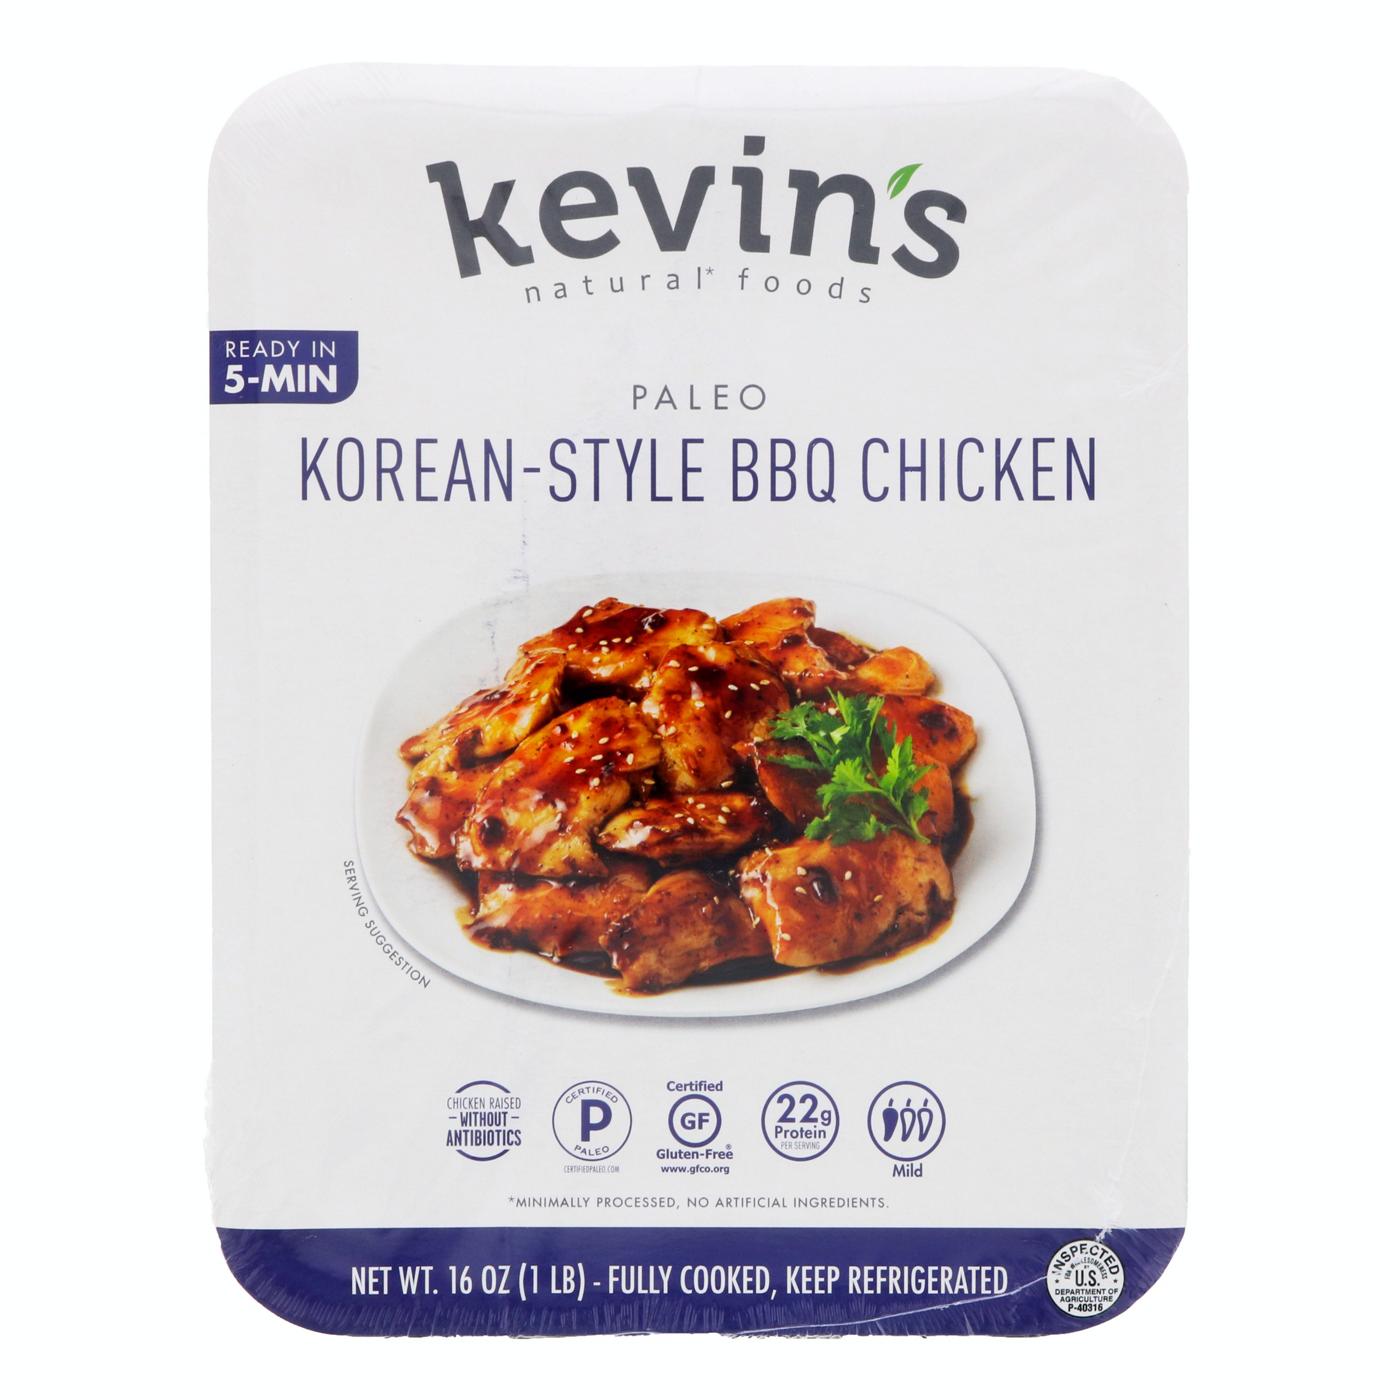 Kevin's Natural Foods Paleo Korean-Style BBQ Chicken; image 1 of 3